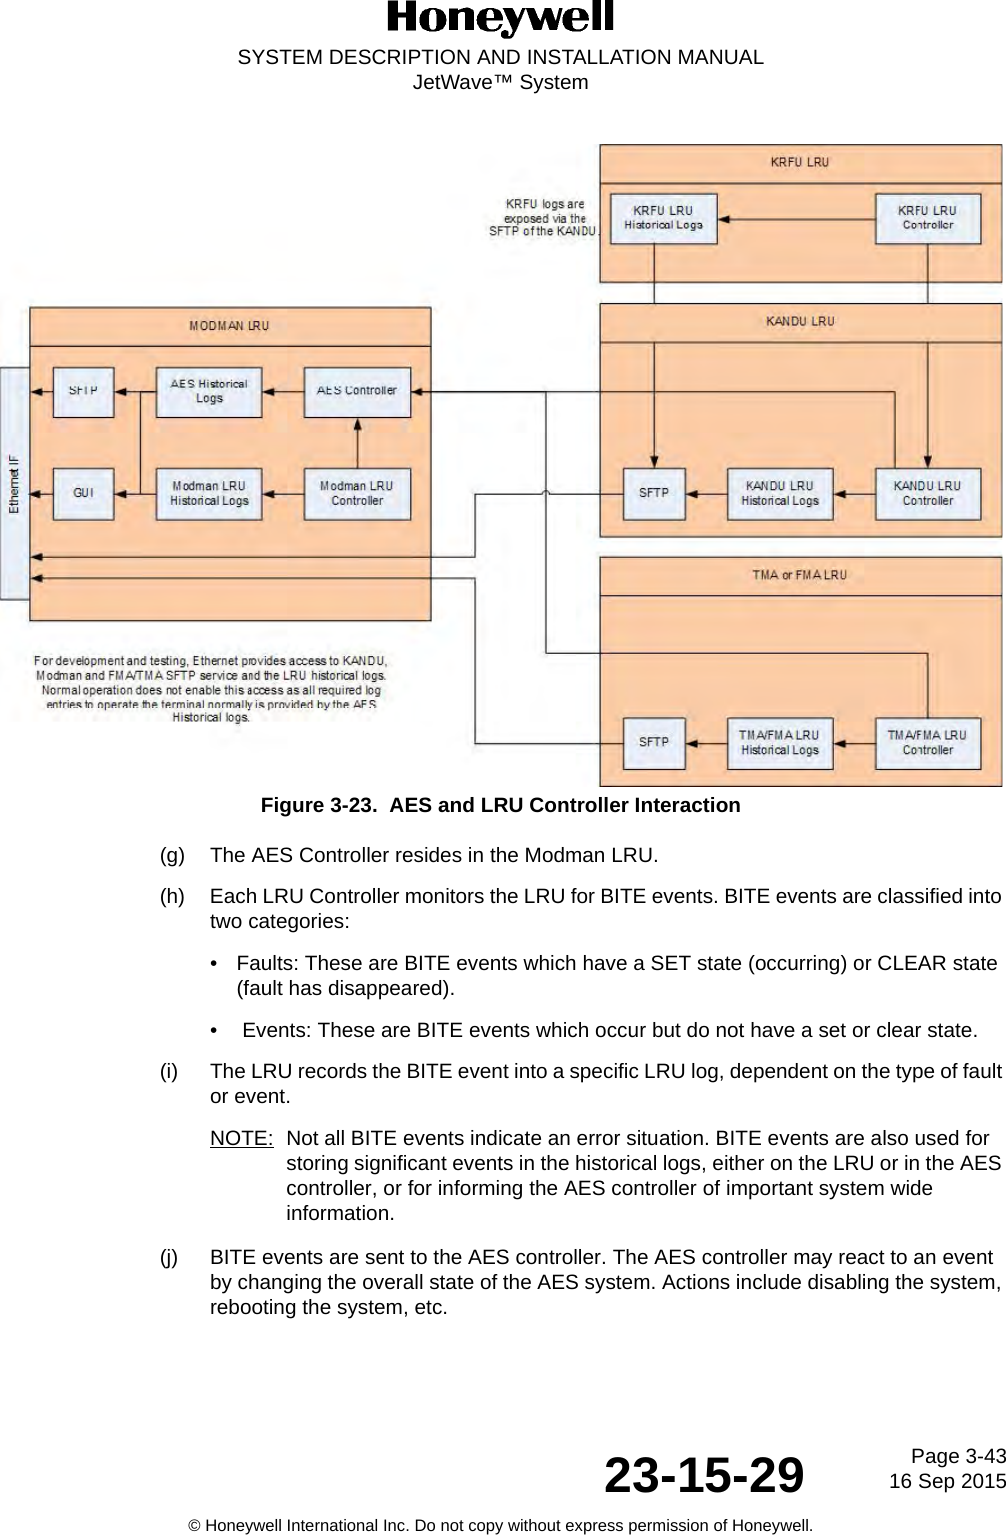 Page 3-4316 Sep 201523-15-29SYSTEM DESCRIPTION AND INSTALLATION MANUALJetWave™ System© Honeywell International Inc. Do not copy without express permission of Honeywell.Figure 3-23.  AES and LRU Controller Interaction(g) The AES Controller resides in the Modman LRU.(h) Each LRU Controller monitors the LRU for BITE events. BITE events are classified into two categories:• Faults: These are BITE events which have a SET state (occurring) or CLEAR state (fault has disappeared).•  Events: These are BITE events which occur but do not have a set or clear state.(i) The LRU records the BITE event into a specific LRU log, dependent on the type of fault or event.NOTE: Not all BITE events indicate an error situation. BITE events are also used for storing significant events in the historical logs, either on the LRU or in the AES controller, or for informing the AES controller of important system wide information.(j) BITE events are sent to the AES controller. The AES controller may react to an event by changing the overall state of the AES system. Actions include disabling the system, rebooting the system, etc.